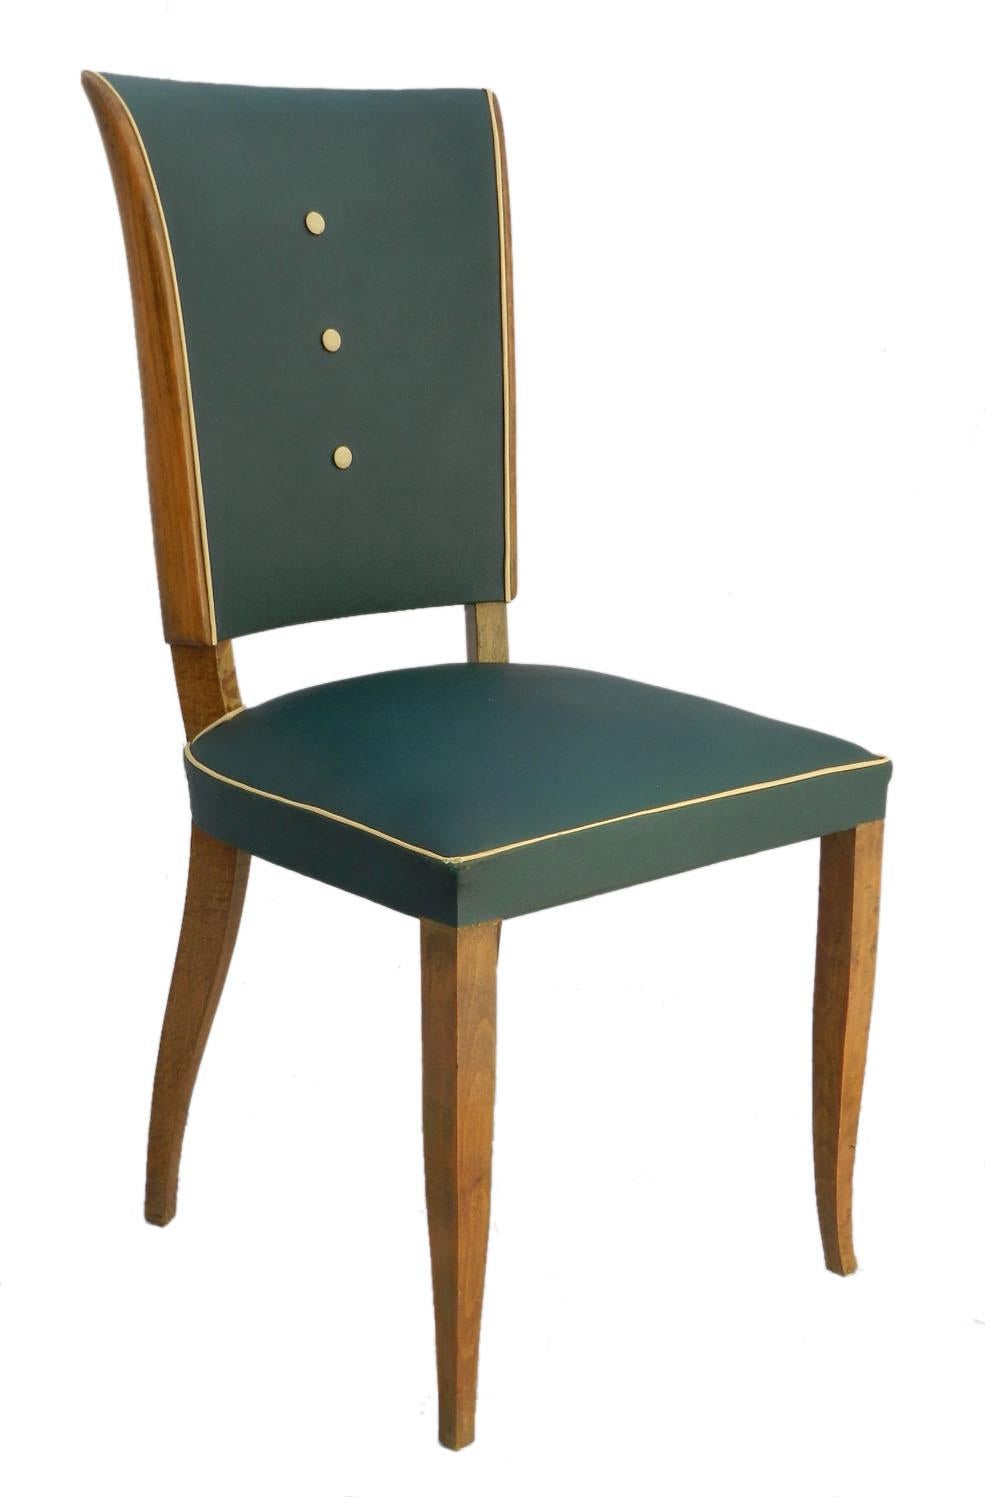 Six Art Deco dining chairs French circa 1930 midcentury
Classic Leleu shape chairs
Use as are in original vintage condition with minor faults of age and use
Alternatively recover and / or customize.
Please ask if you would like a very reasonable